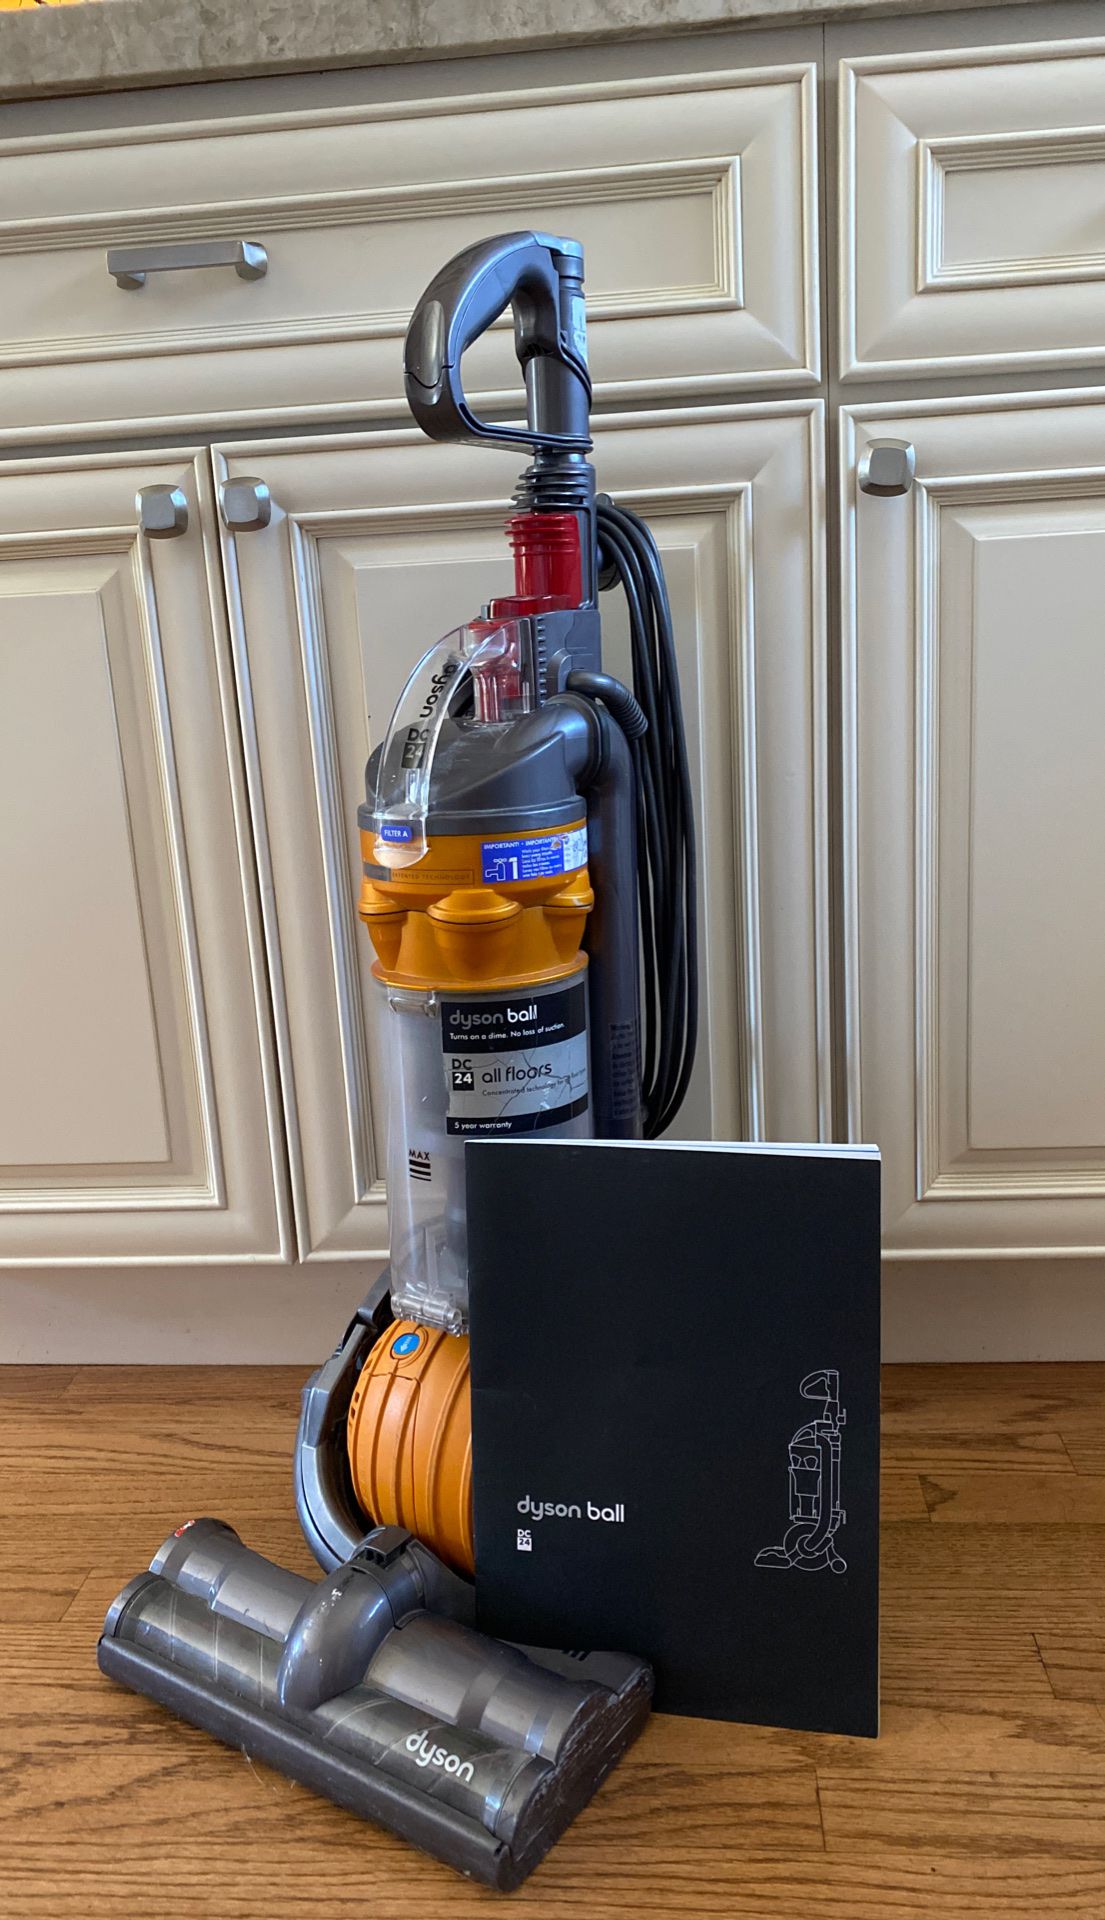 Dyson DC24 all floors vacuum it is used but haven’t needed it since I got all hardwood floors and got cordless dyson works perfect !